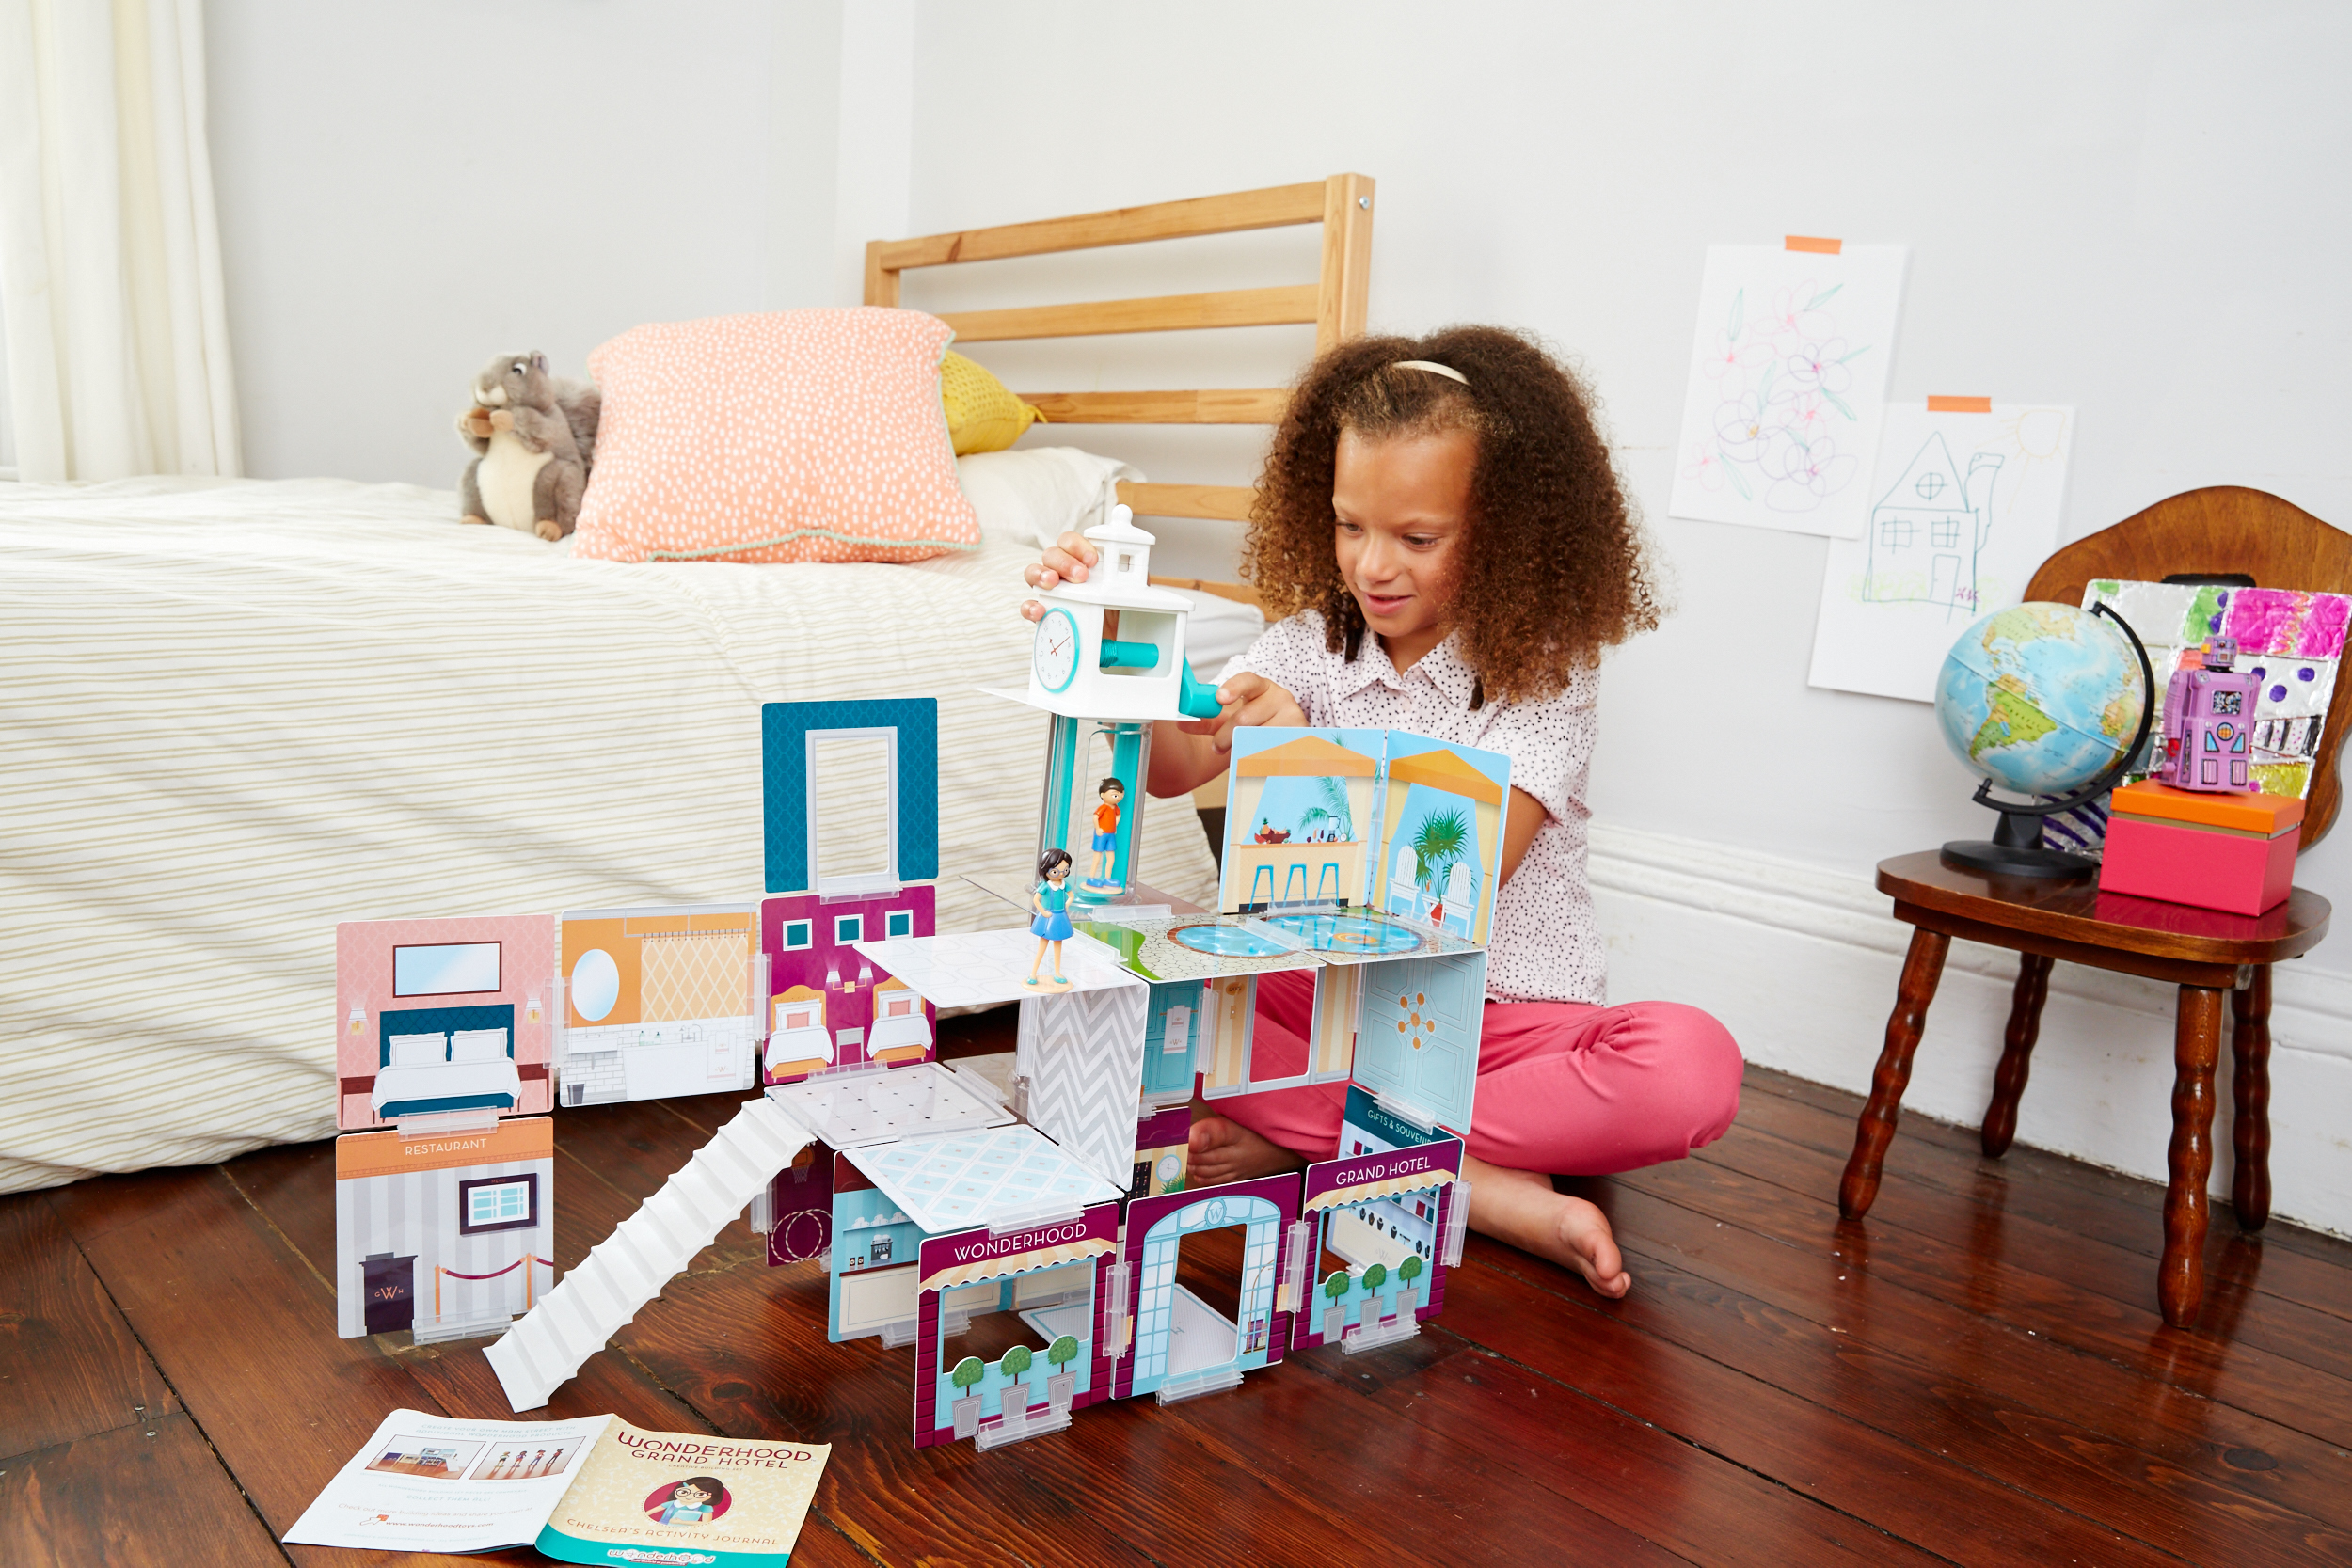 The STEM building sets that empower girls to engineer their futures.